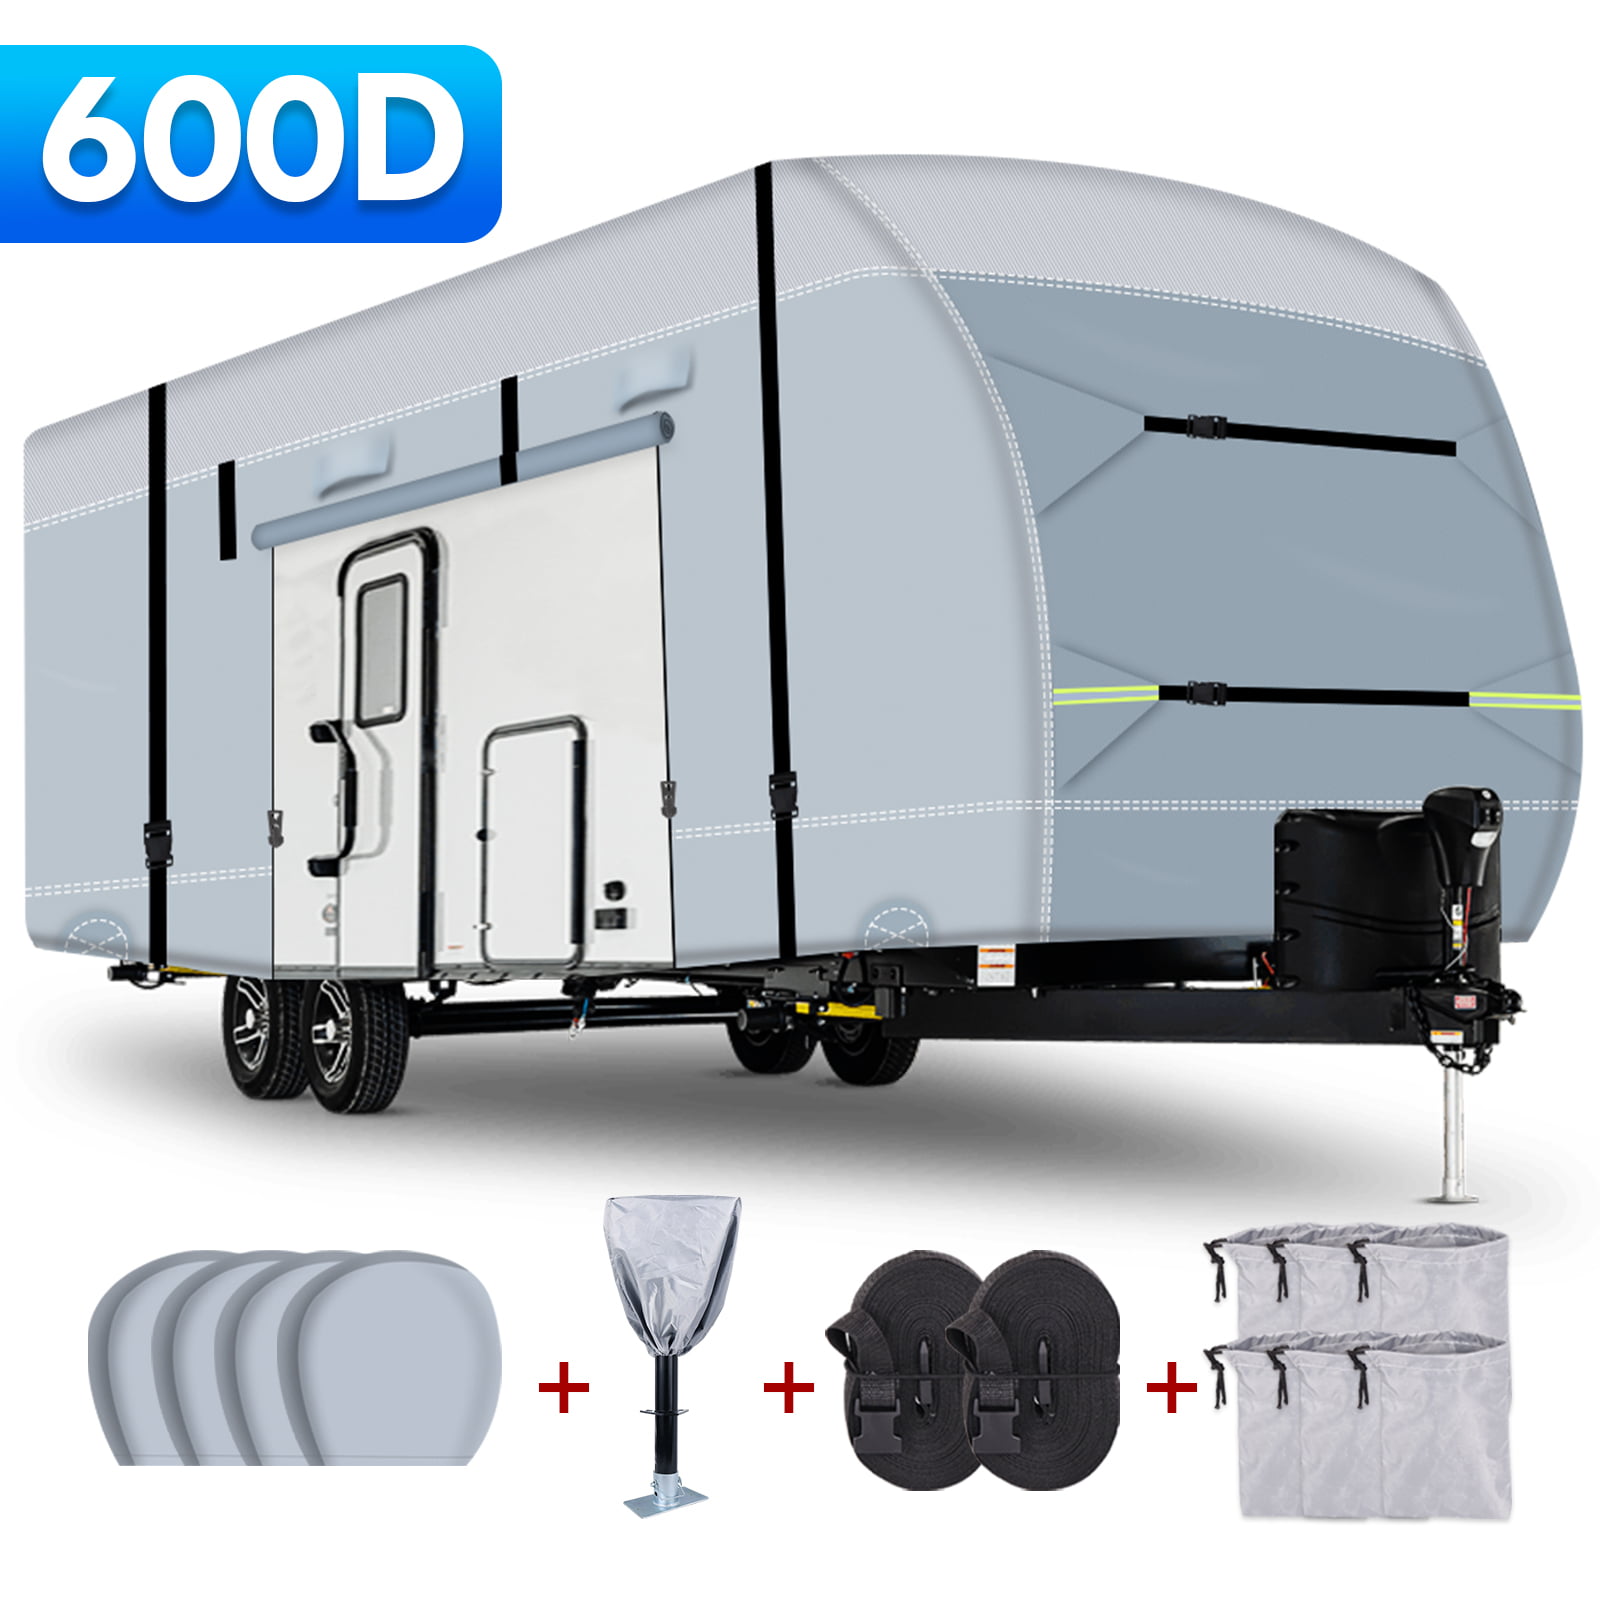 Upgraded Travel Trailer RV Cover Non-Woven Fabric Anti-Aging Waterproof Durable Design Fits 24’ 27’ TT RV Camper with Various Accessories 